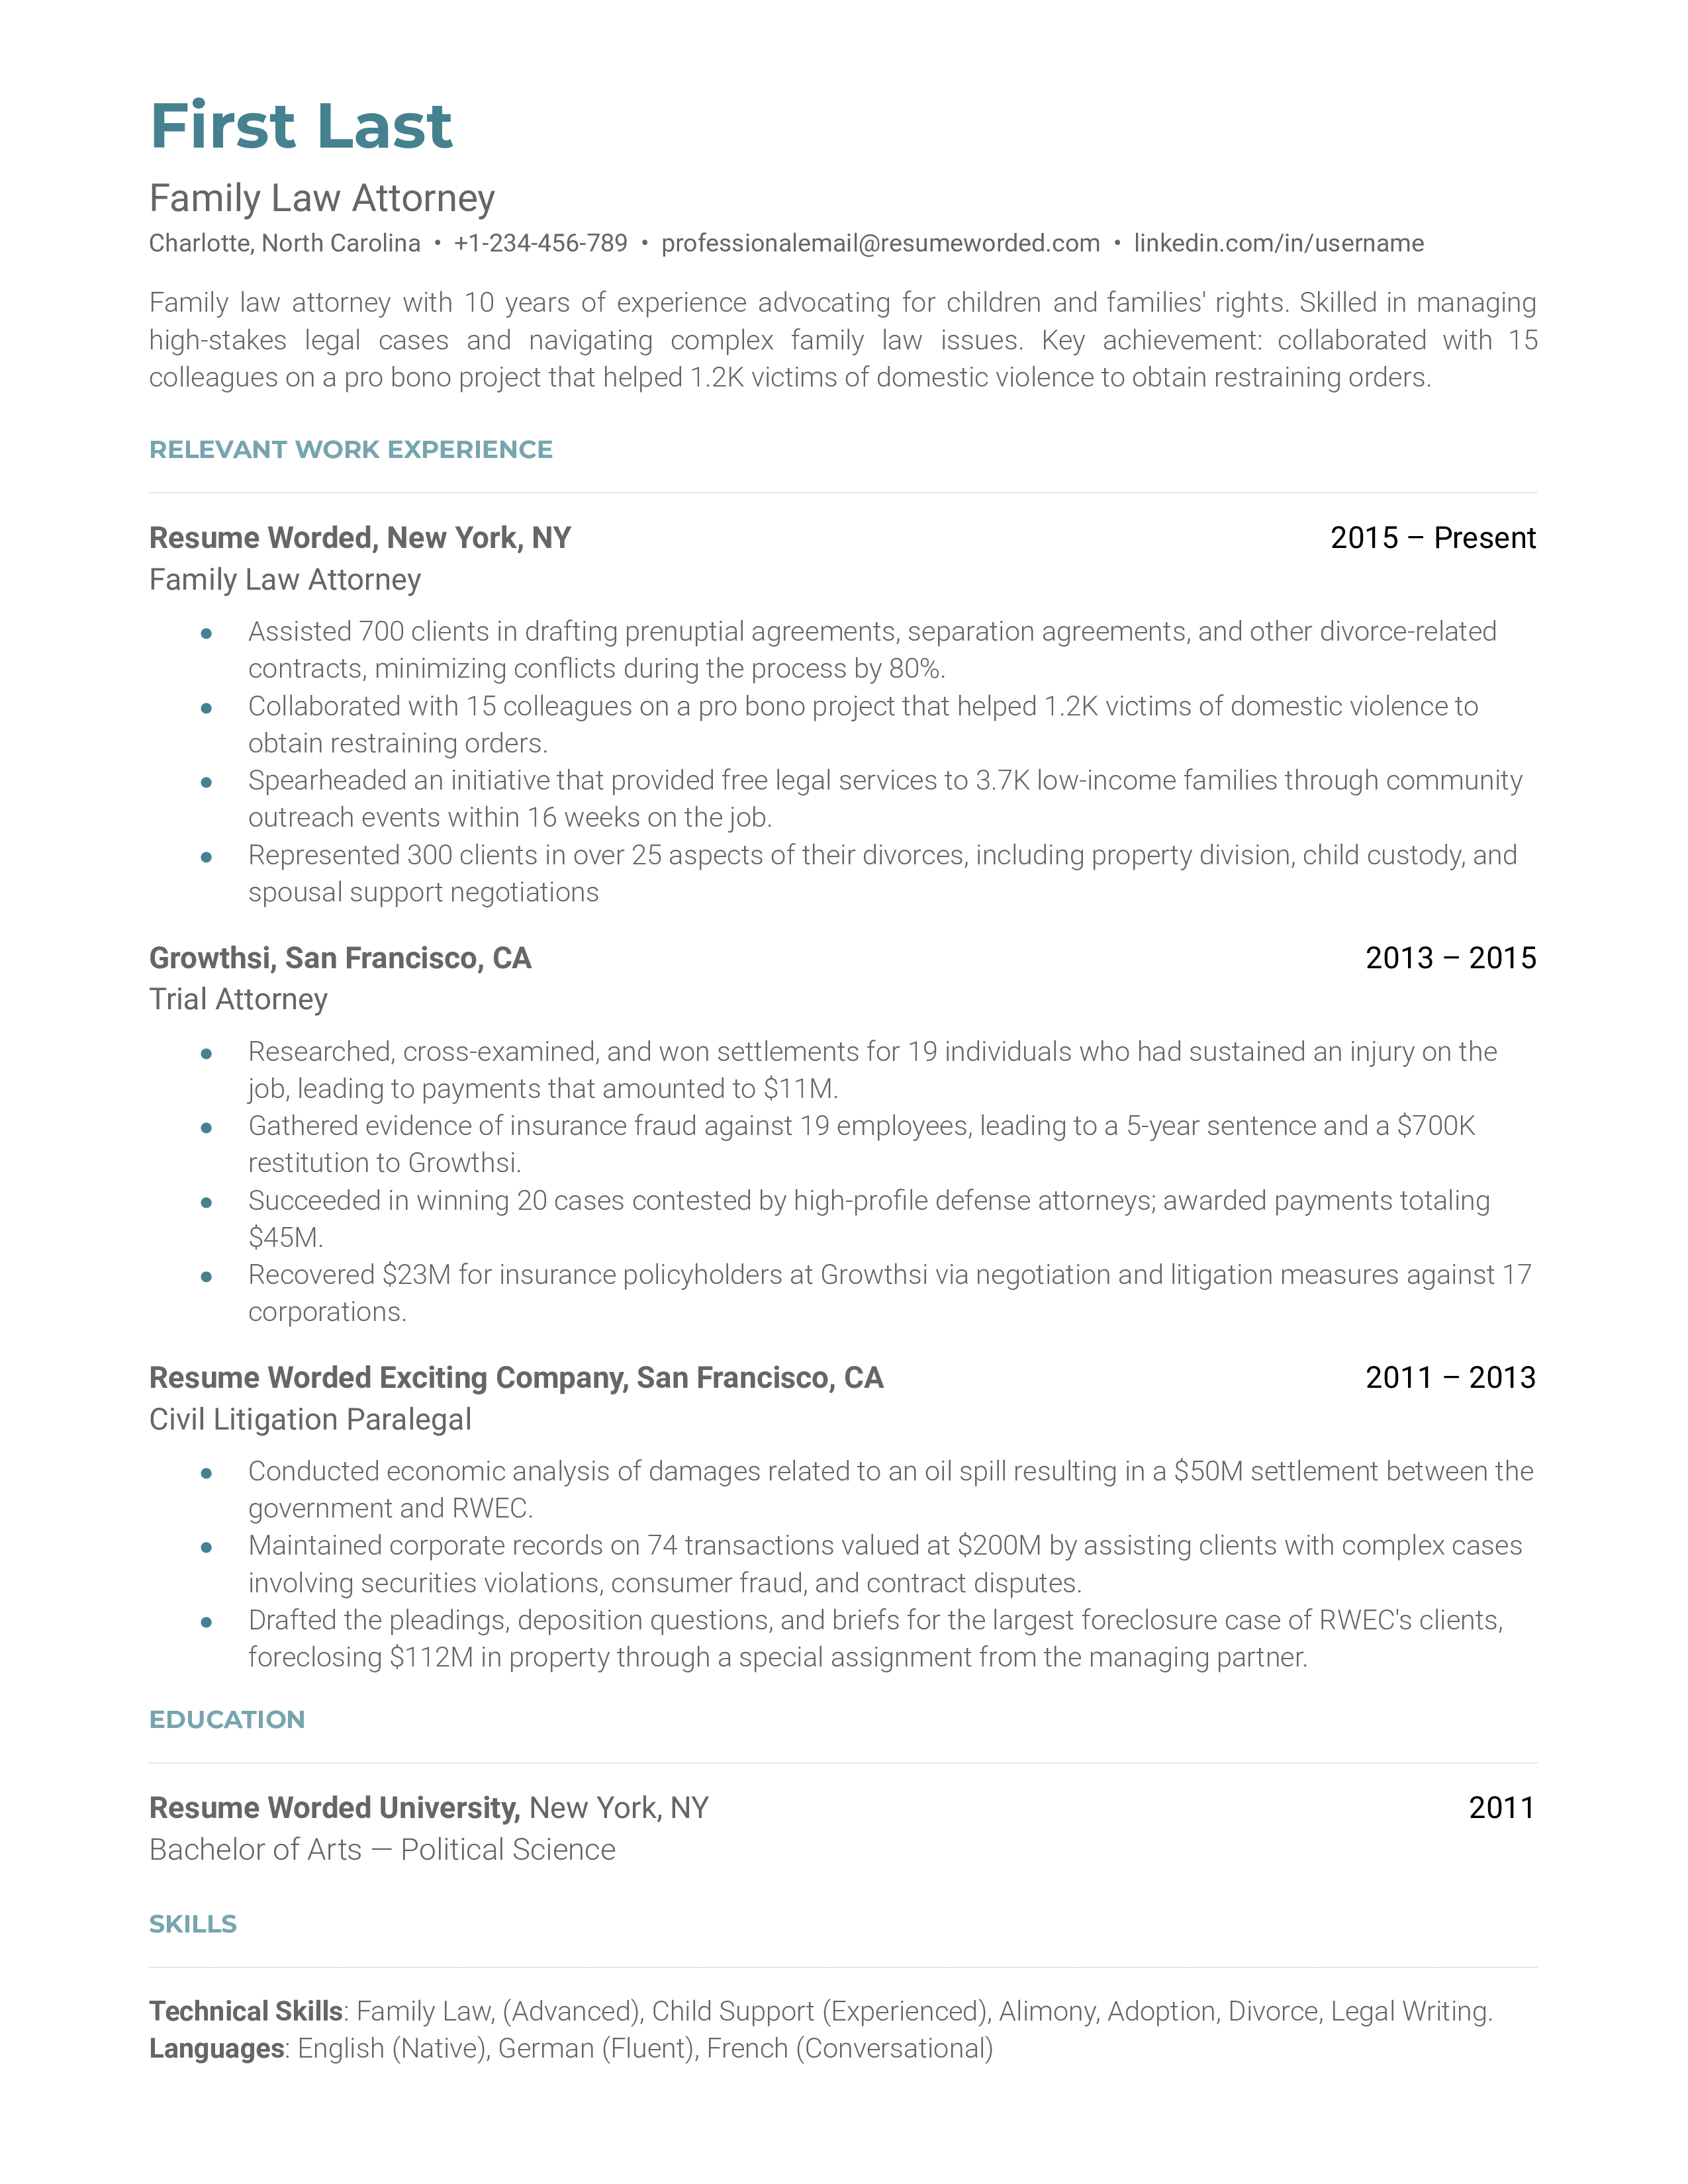 A CV of a Family Law Attorney with focus on empathy and child advocacy experience.